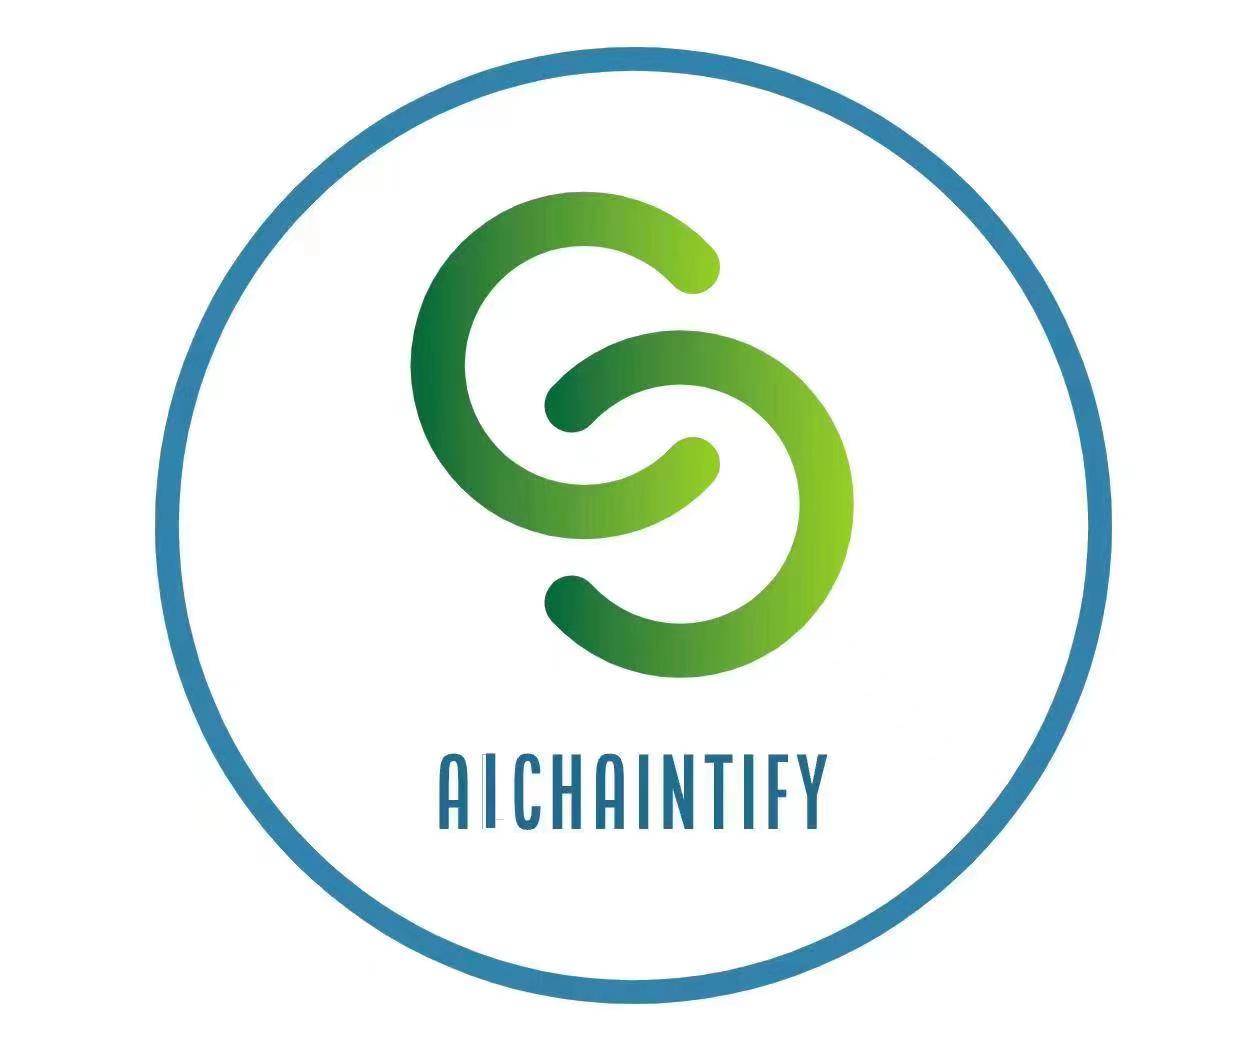 AIchaintify (ACTY) Launched, Revolutionary Blockchain